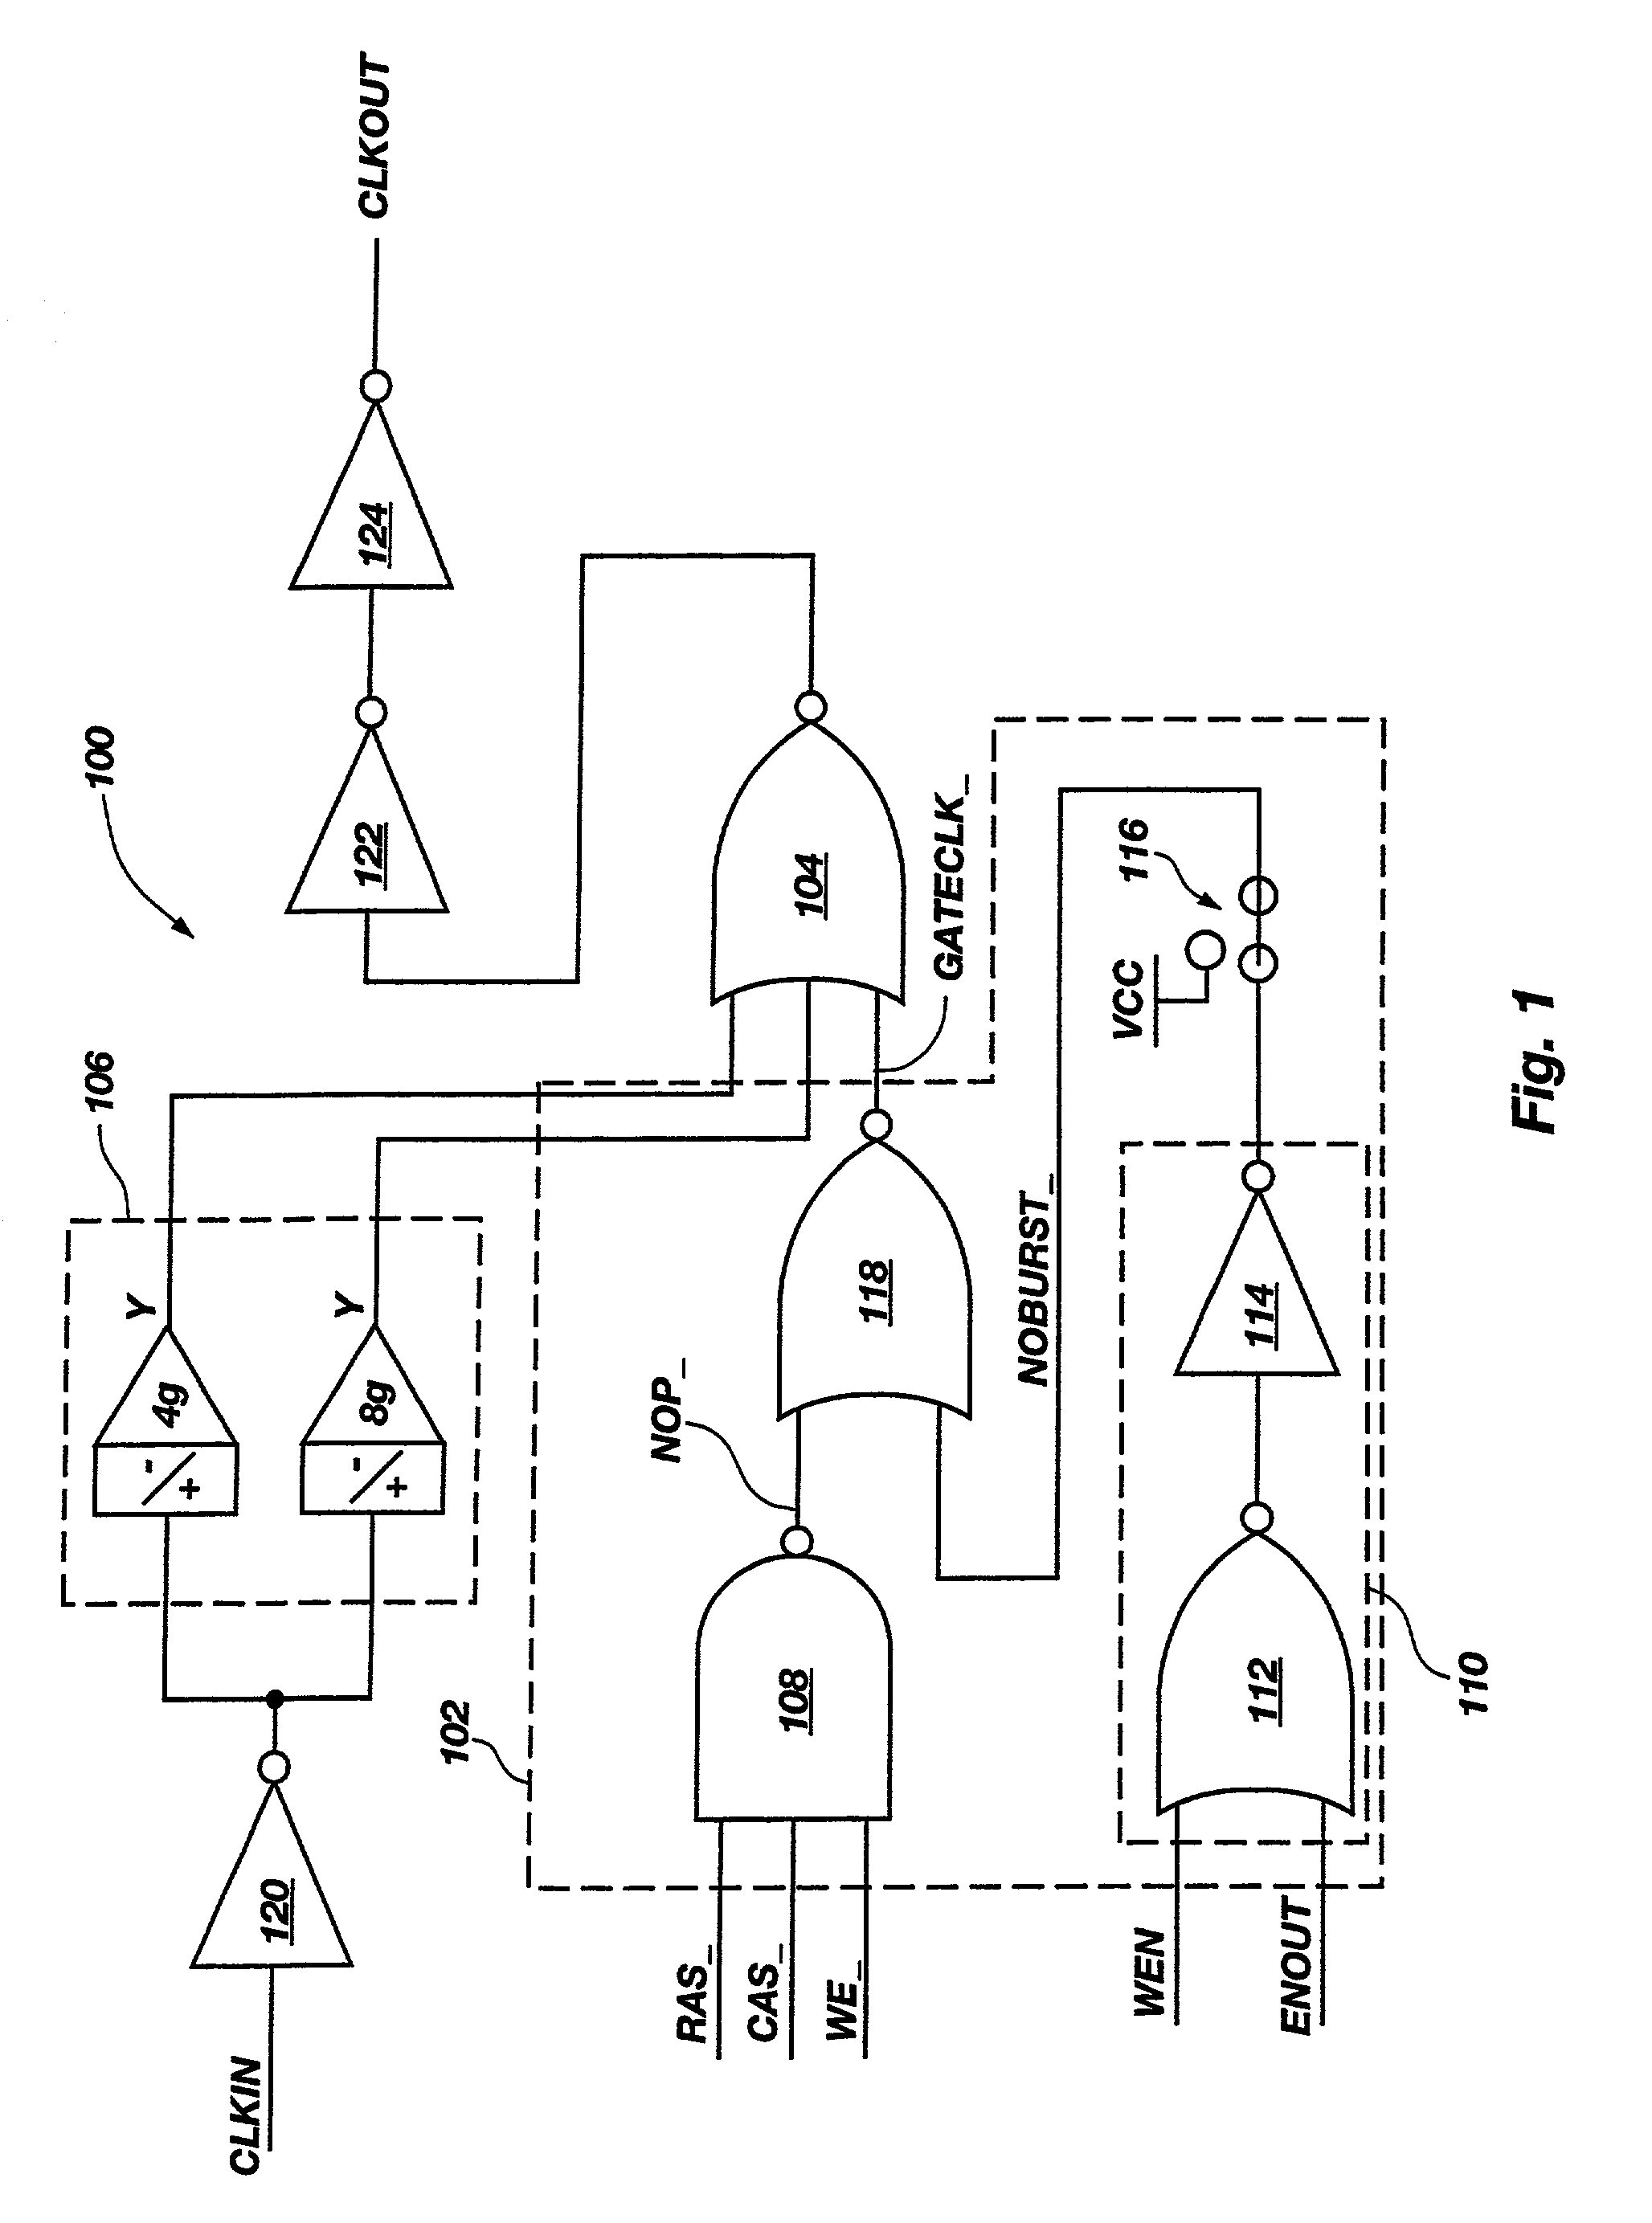 Circuit, system and method for selectively turning off internal clock drivers